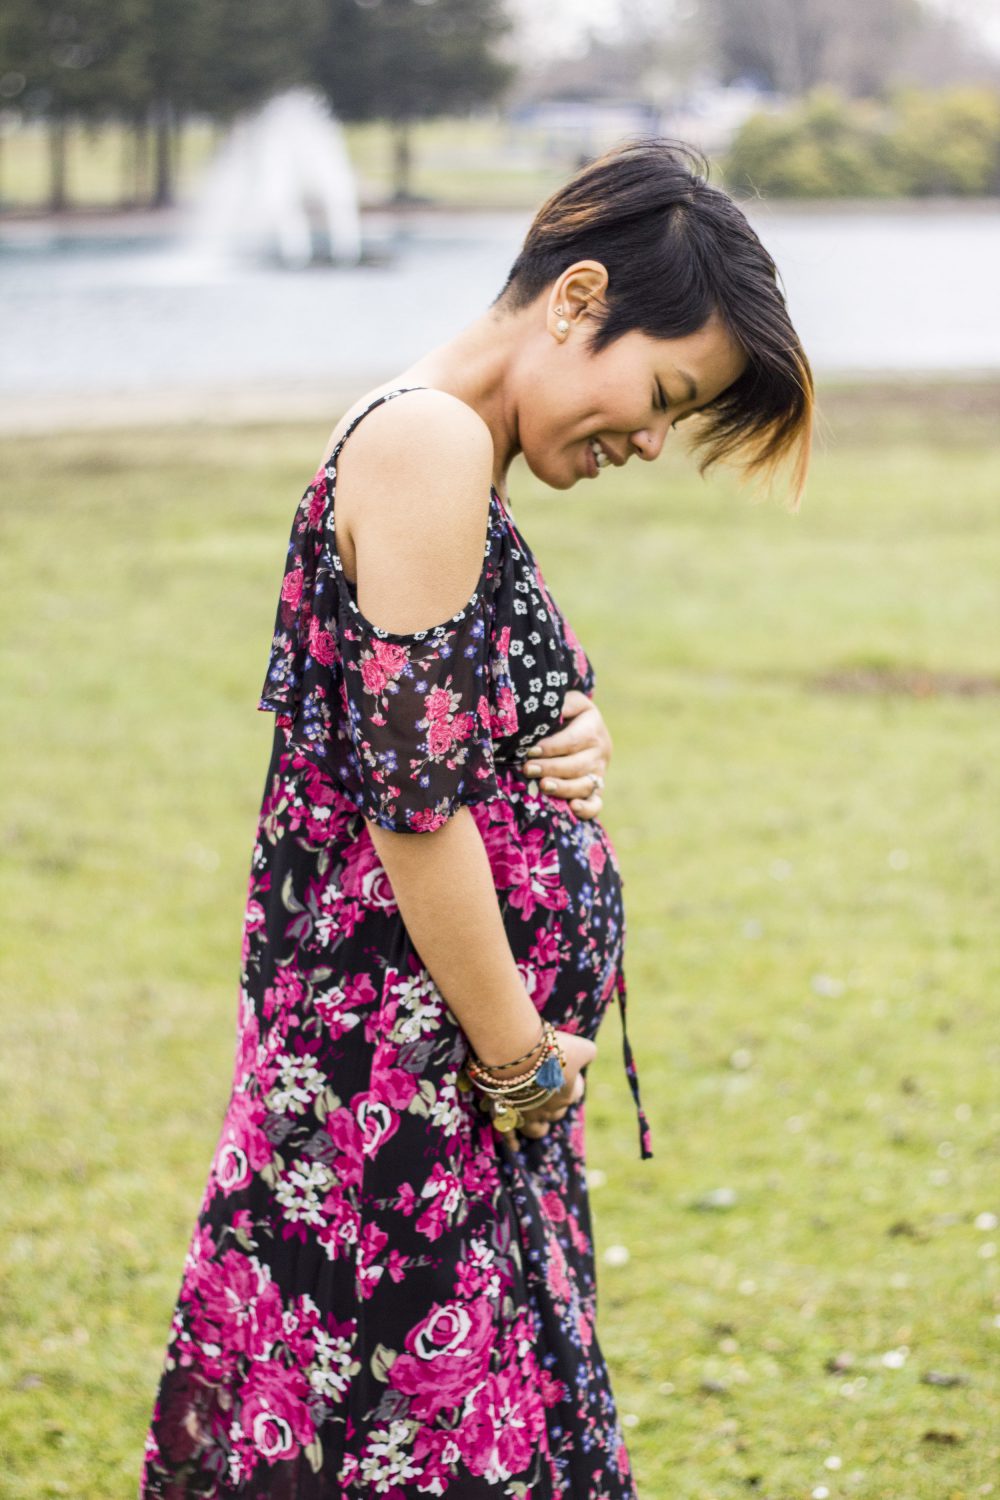 From Baby Bump to Fashionista: Unleash Your Maternity Style